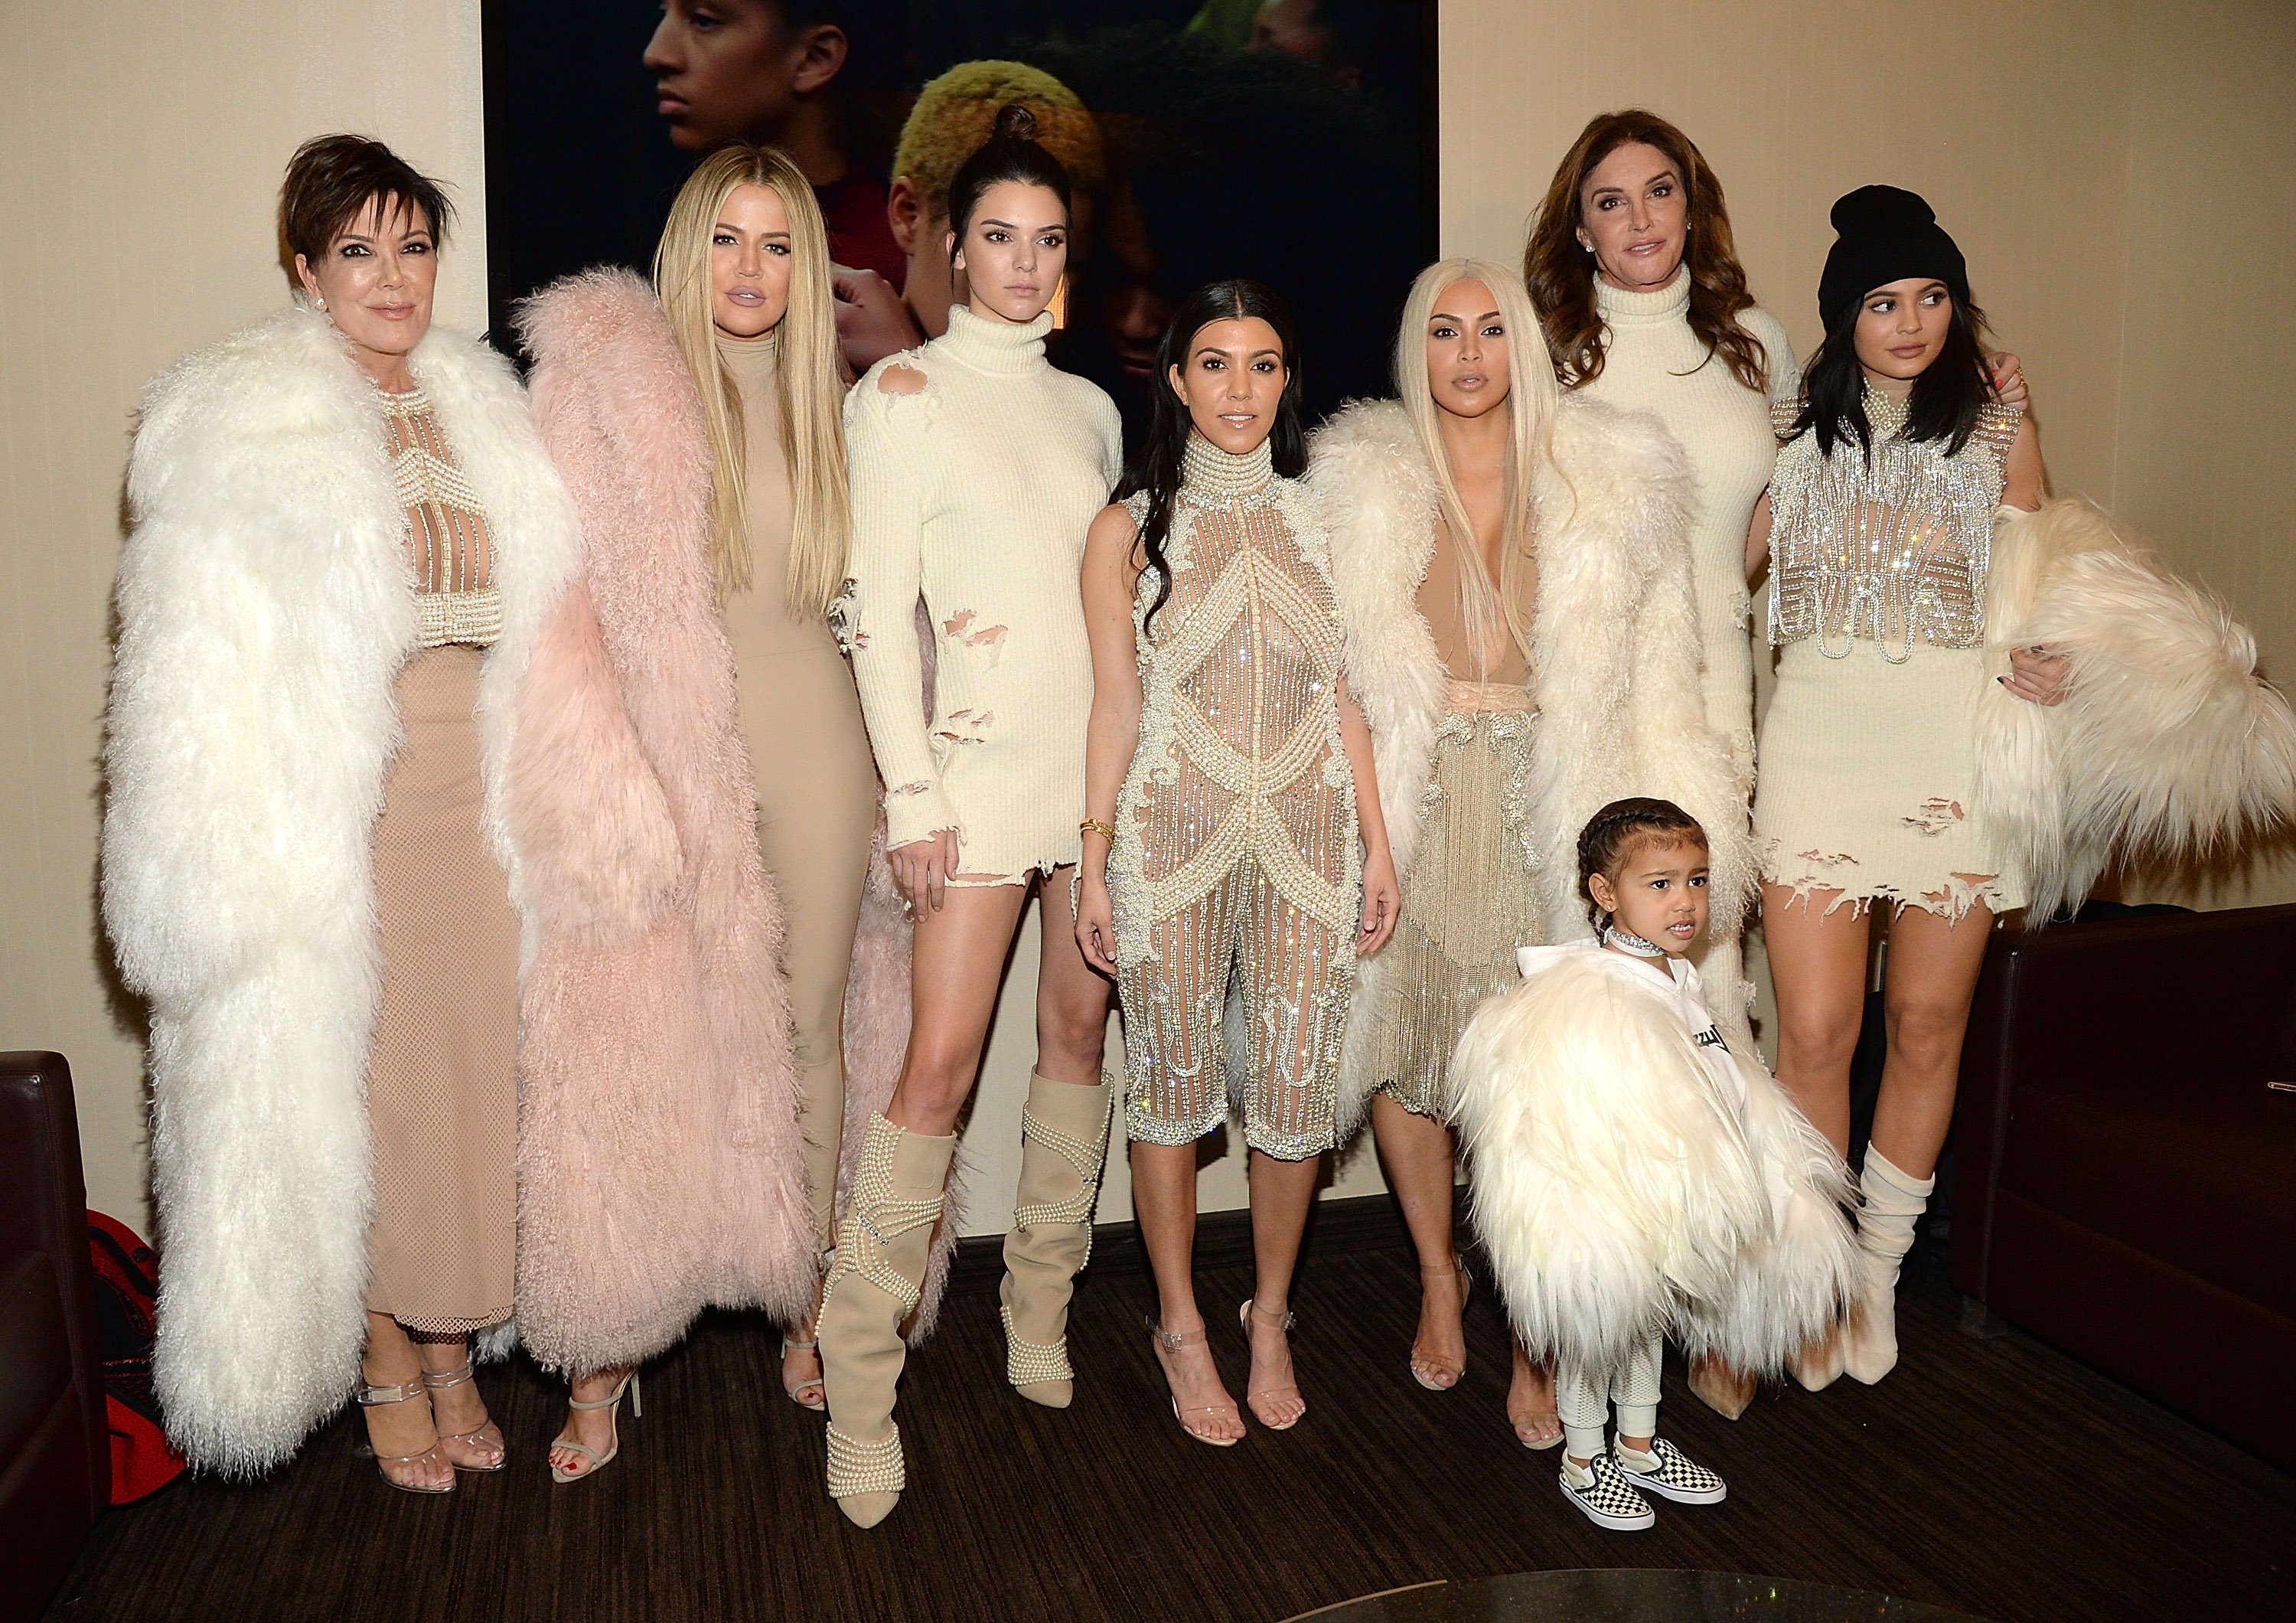 The Kardashian family poses for photos in all-white outfits